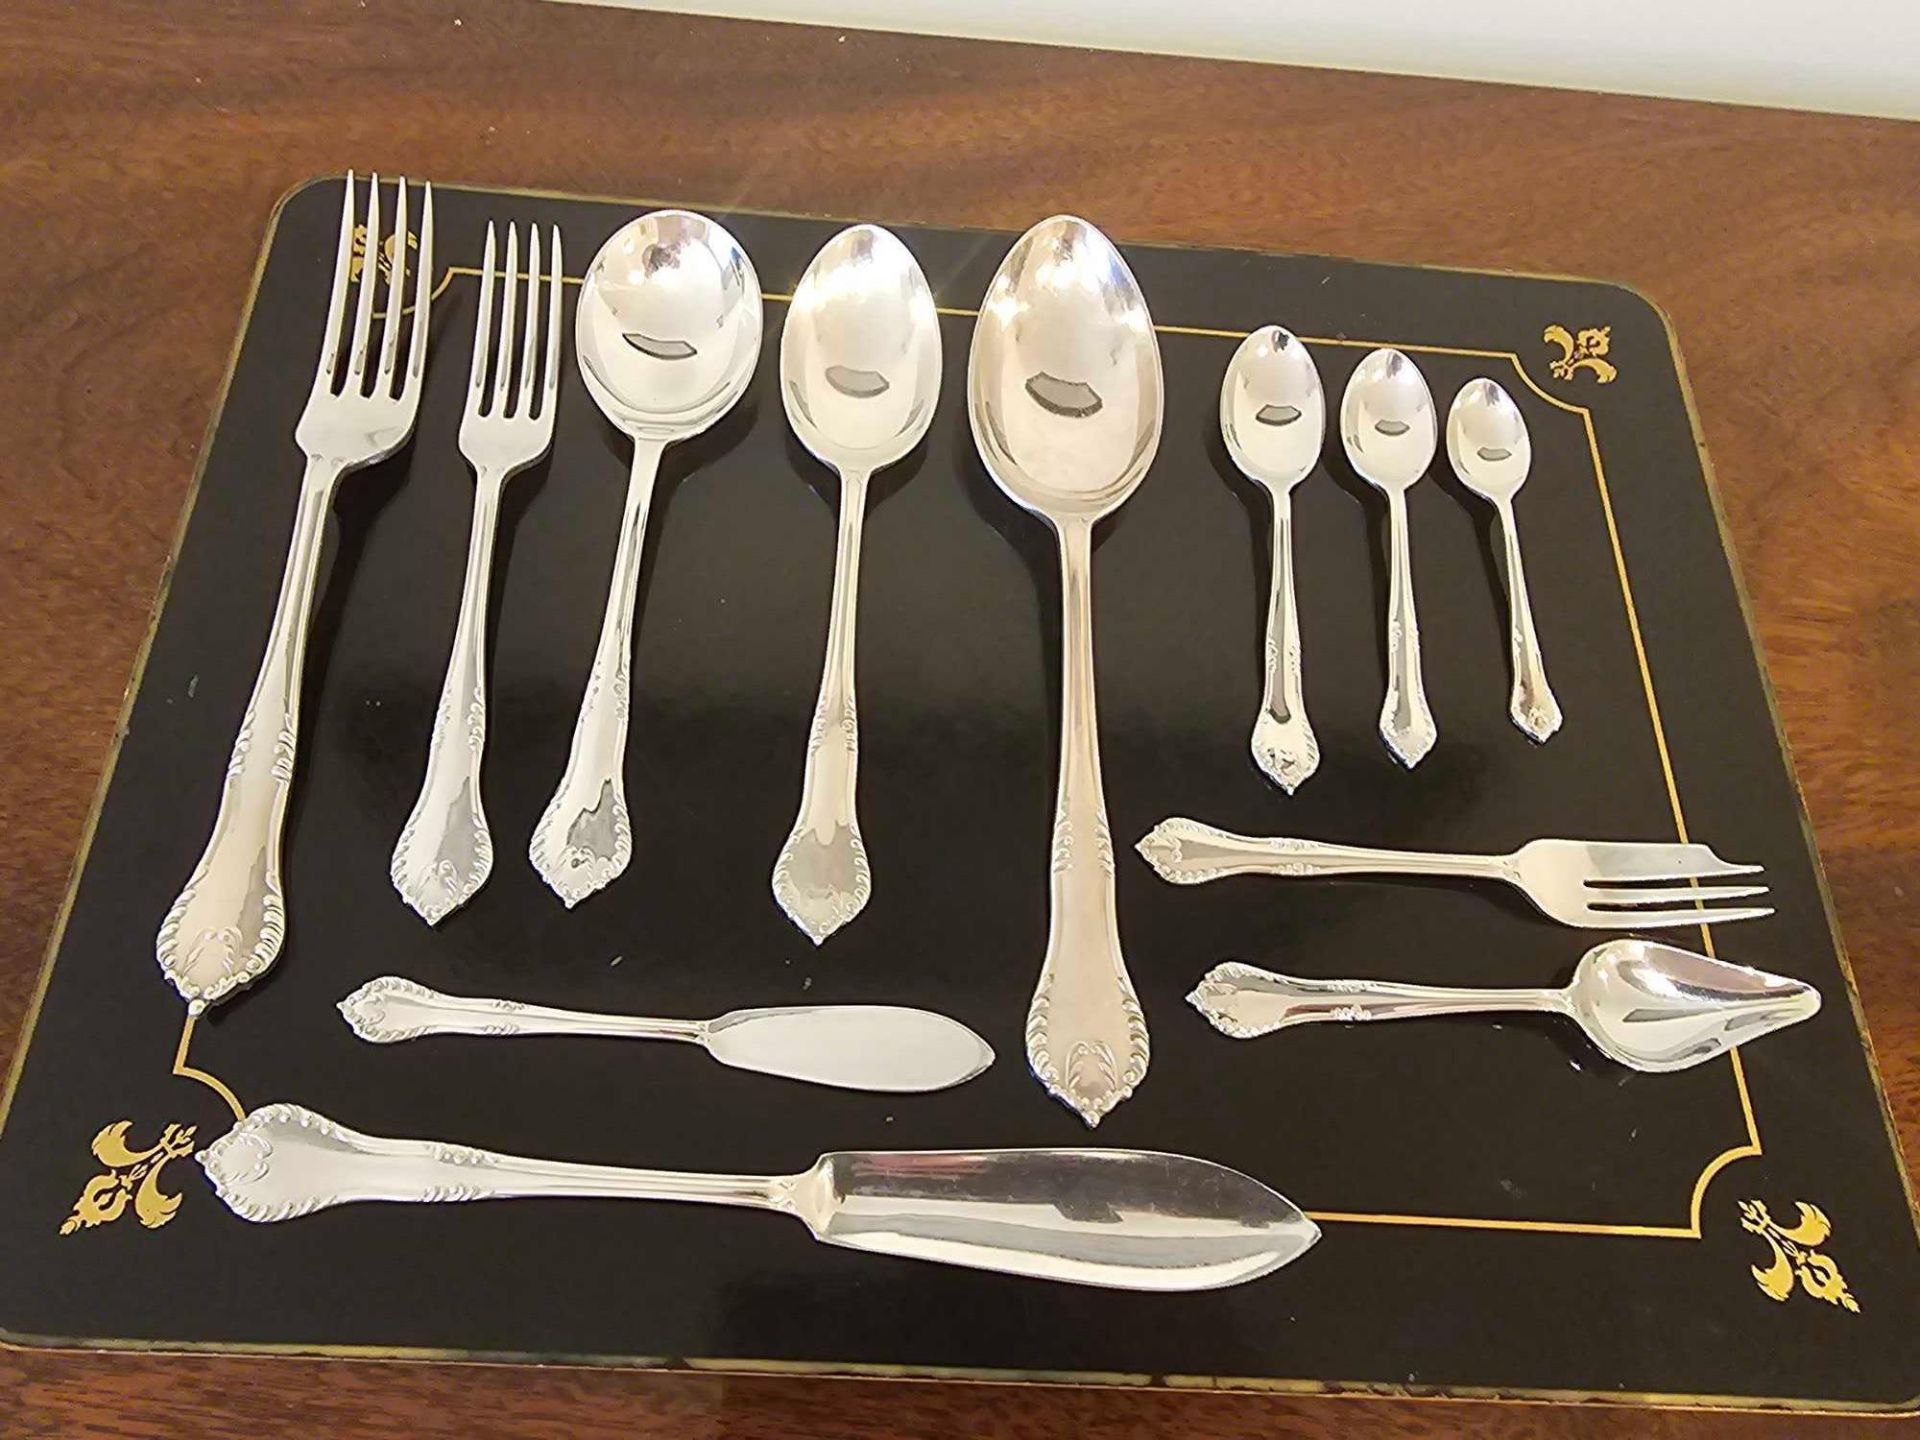 Silverplate Flatware By James Dixon For Harrods 117 Pieces Comprising Of 16 X Dinner Forks, 22 X